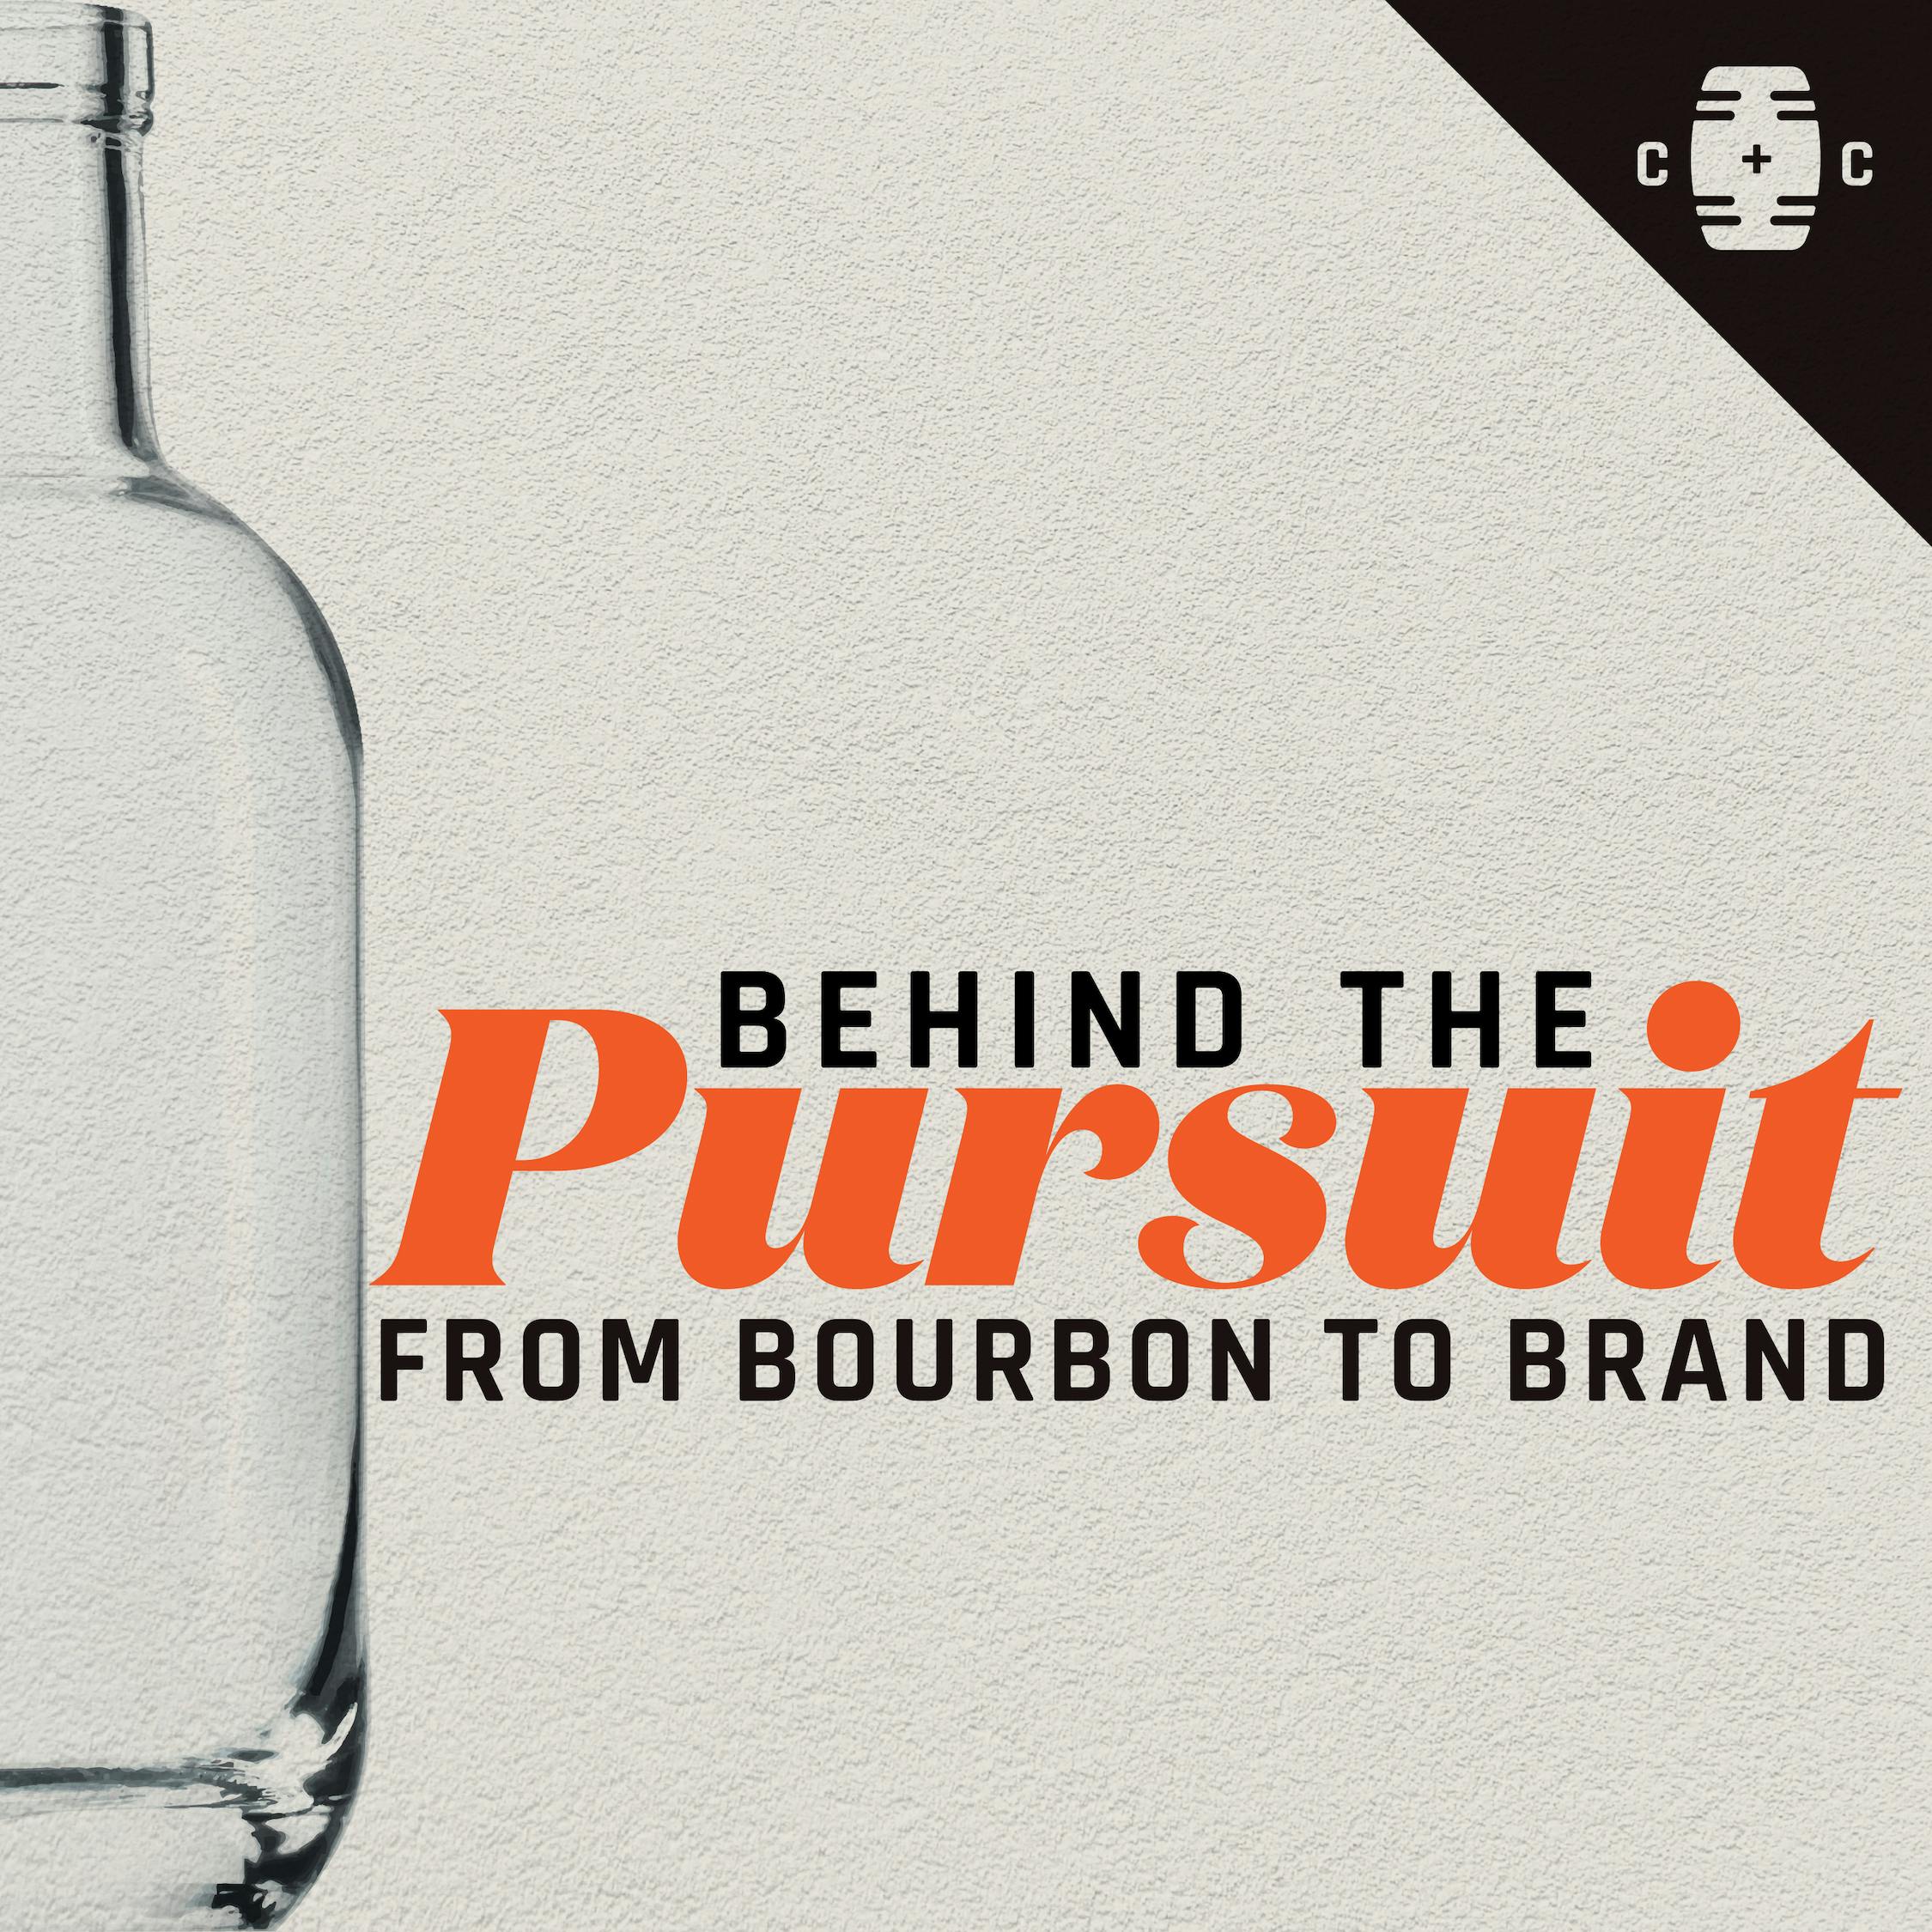 Behind The Pursuit: Non-Distilling Producers Vs Contract Distilling